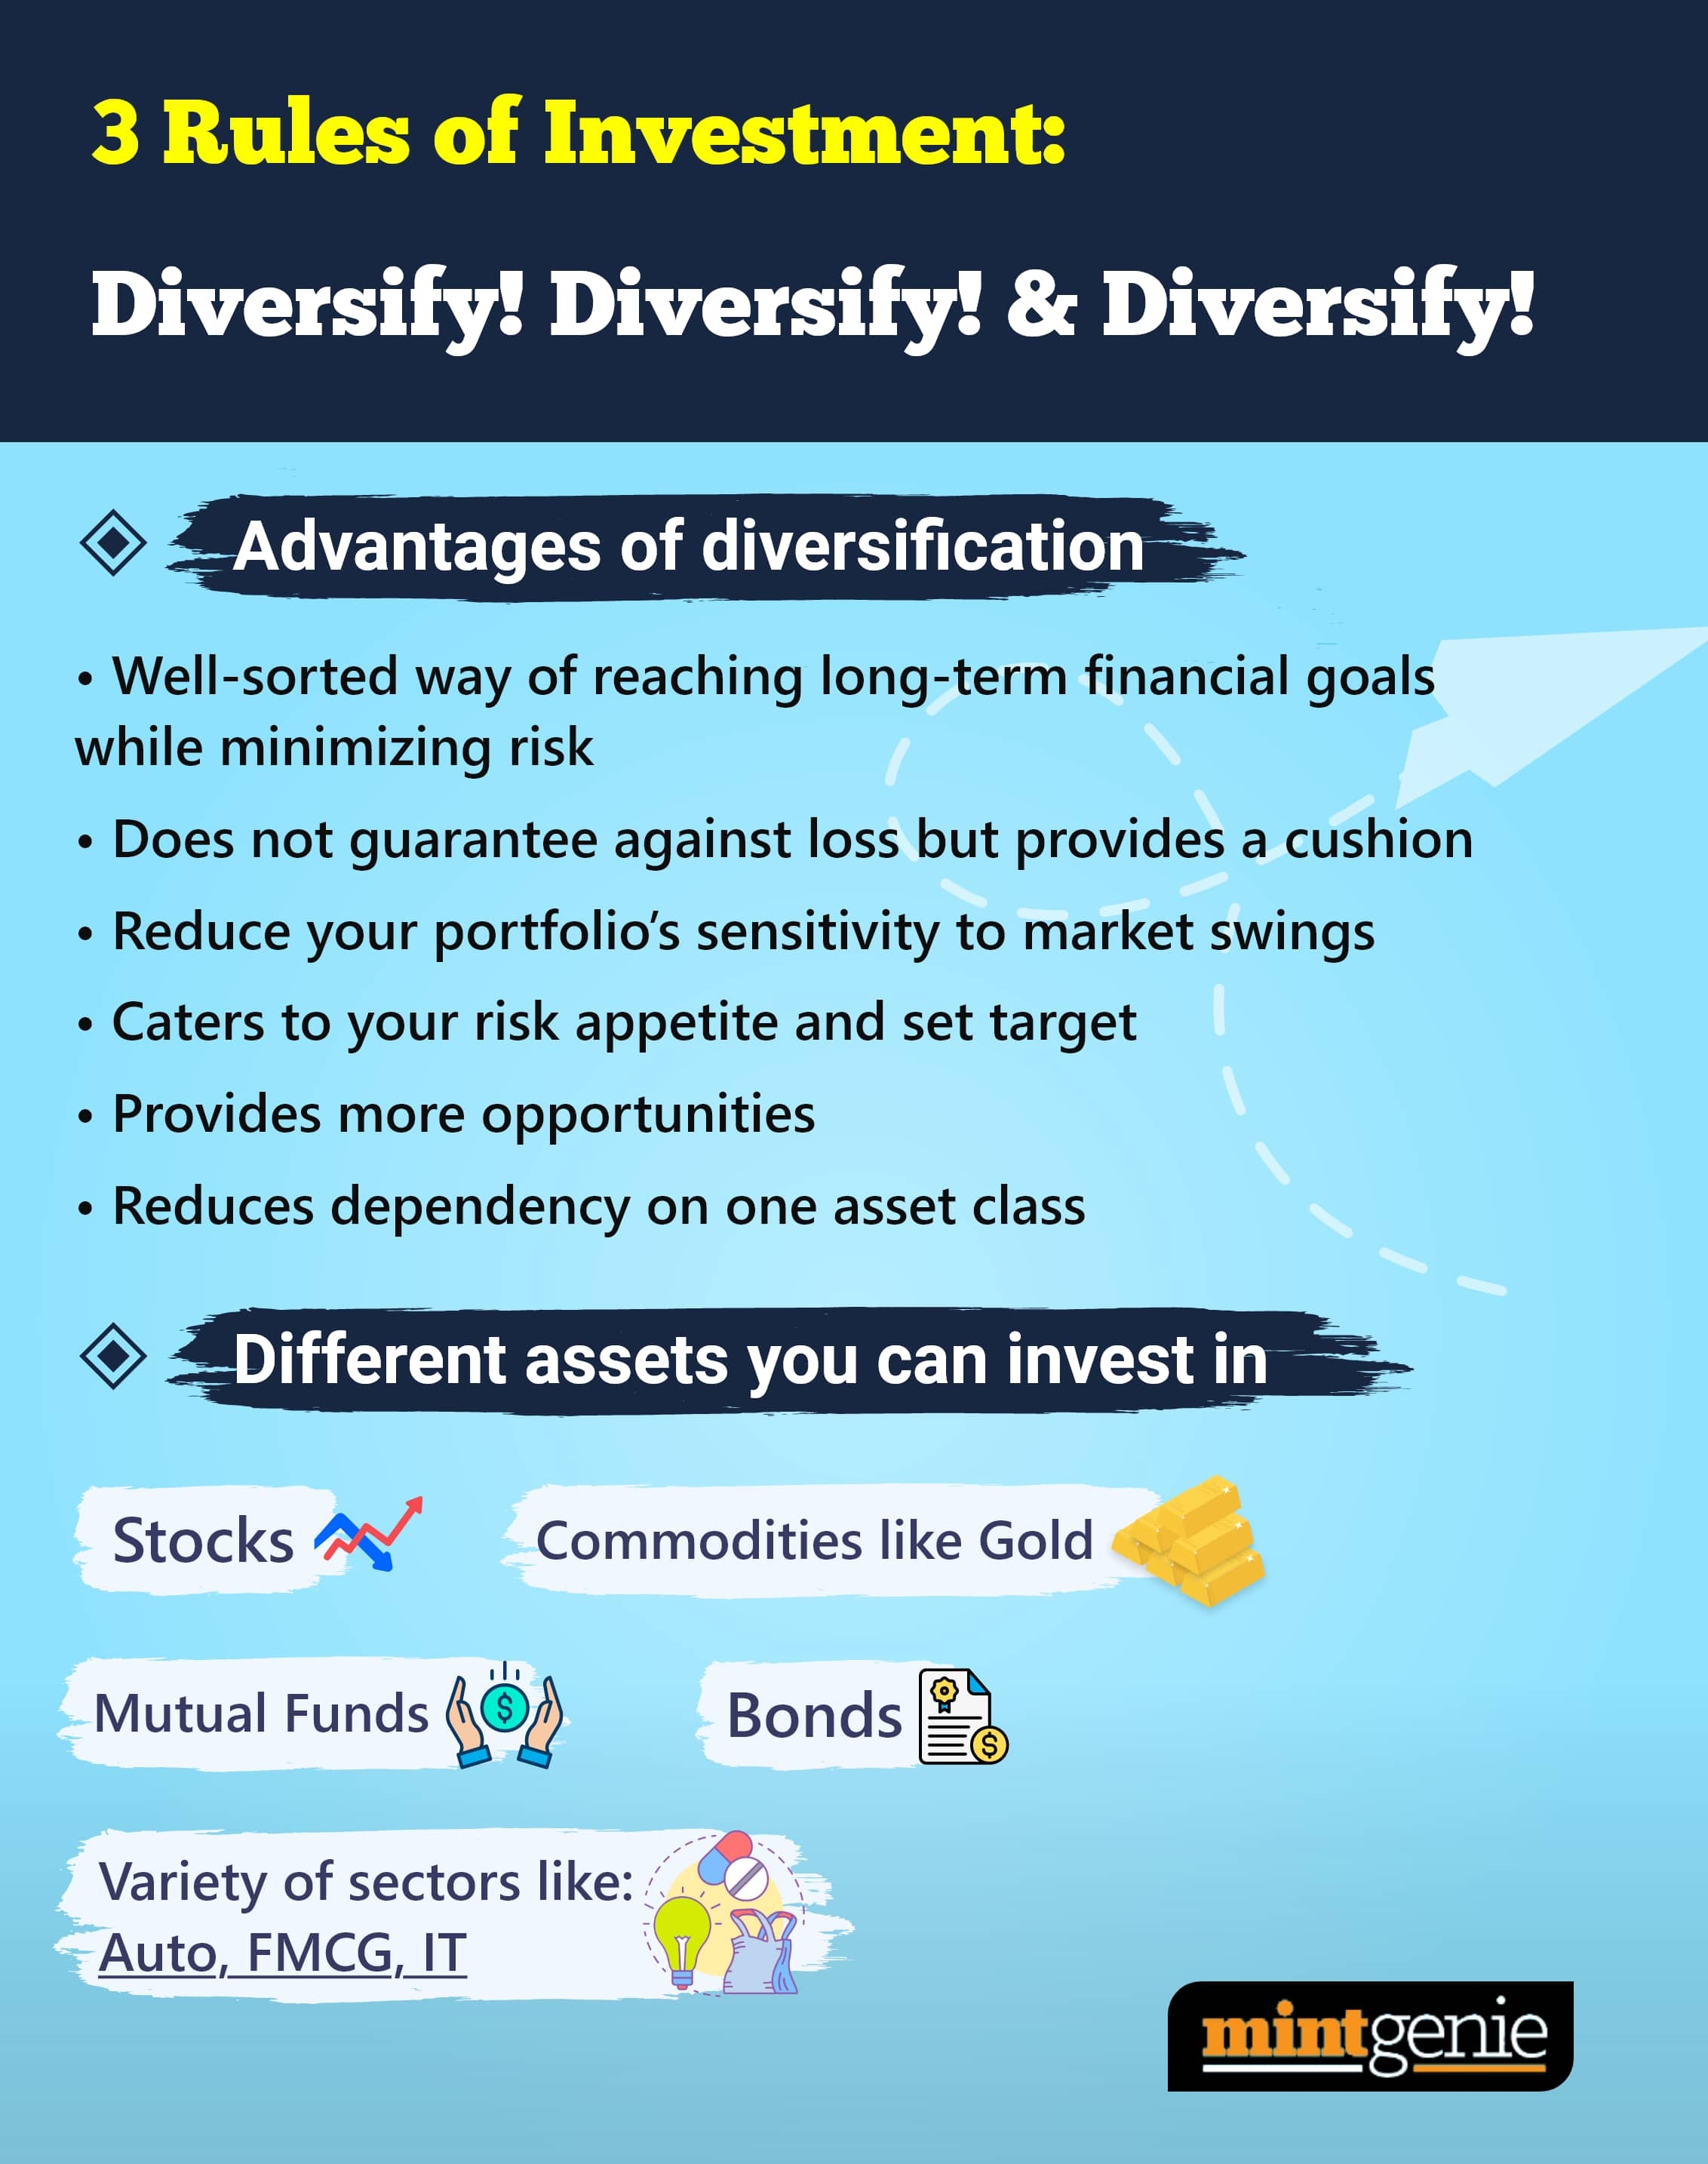 Diversification is a way to reach long-term financial goal while minimising risk.&nbsp;